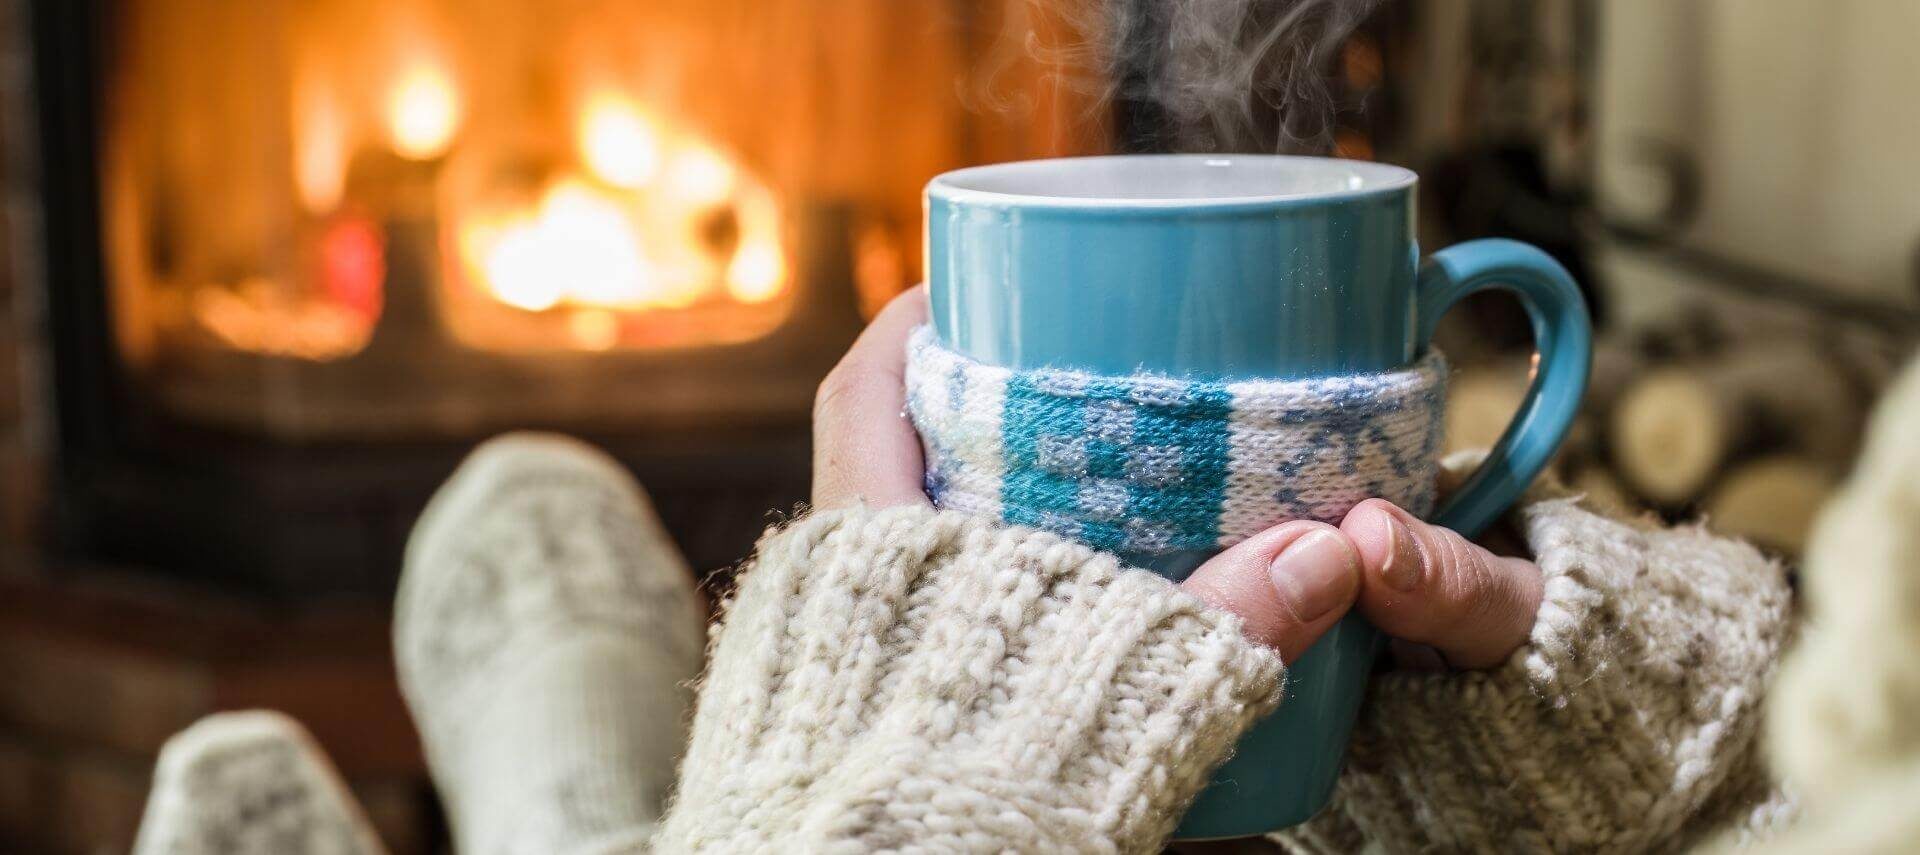 Woman holding mug and sitting by a cozy fireplace.